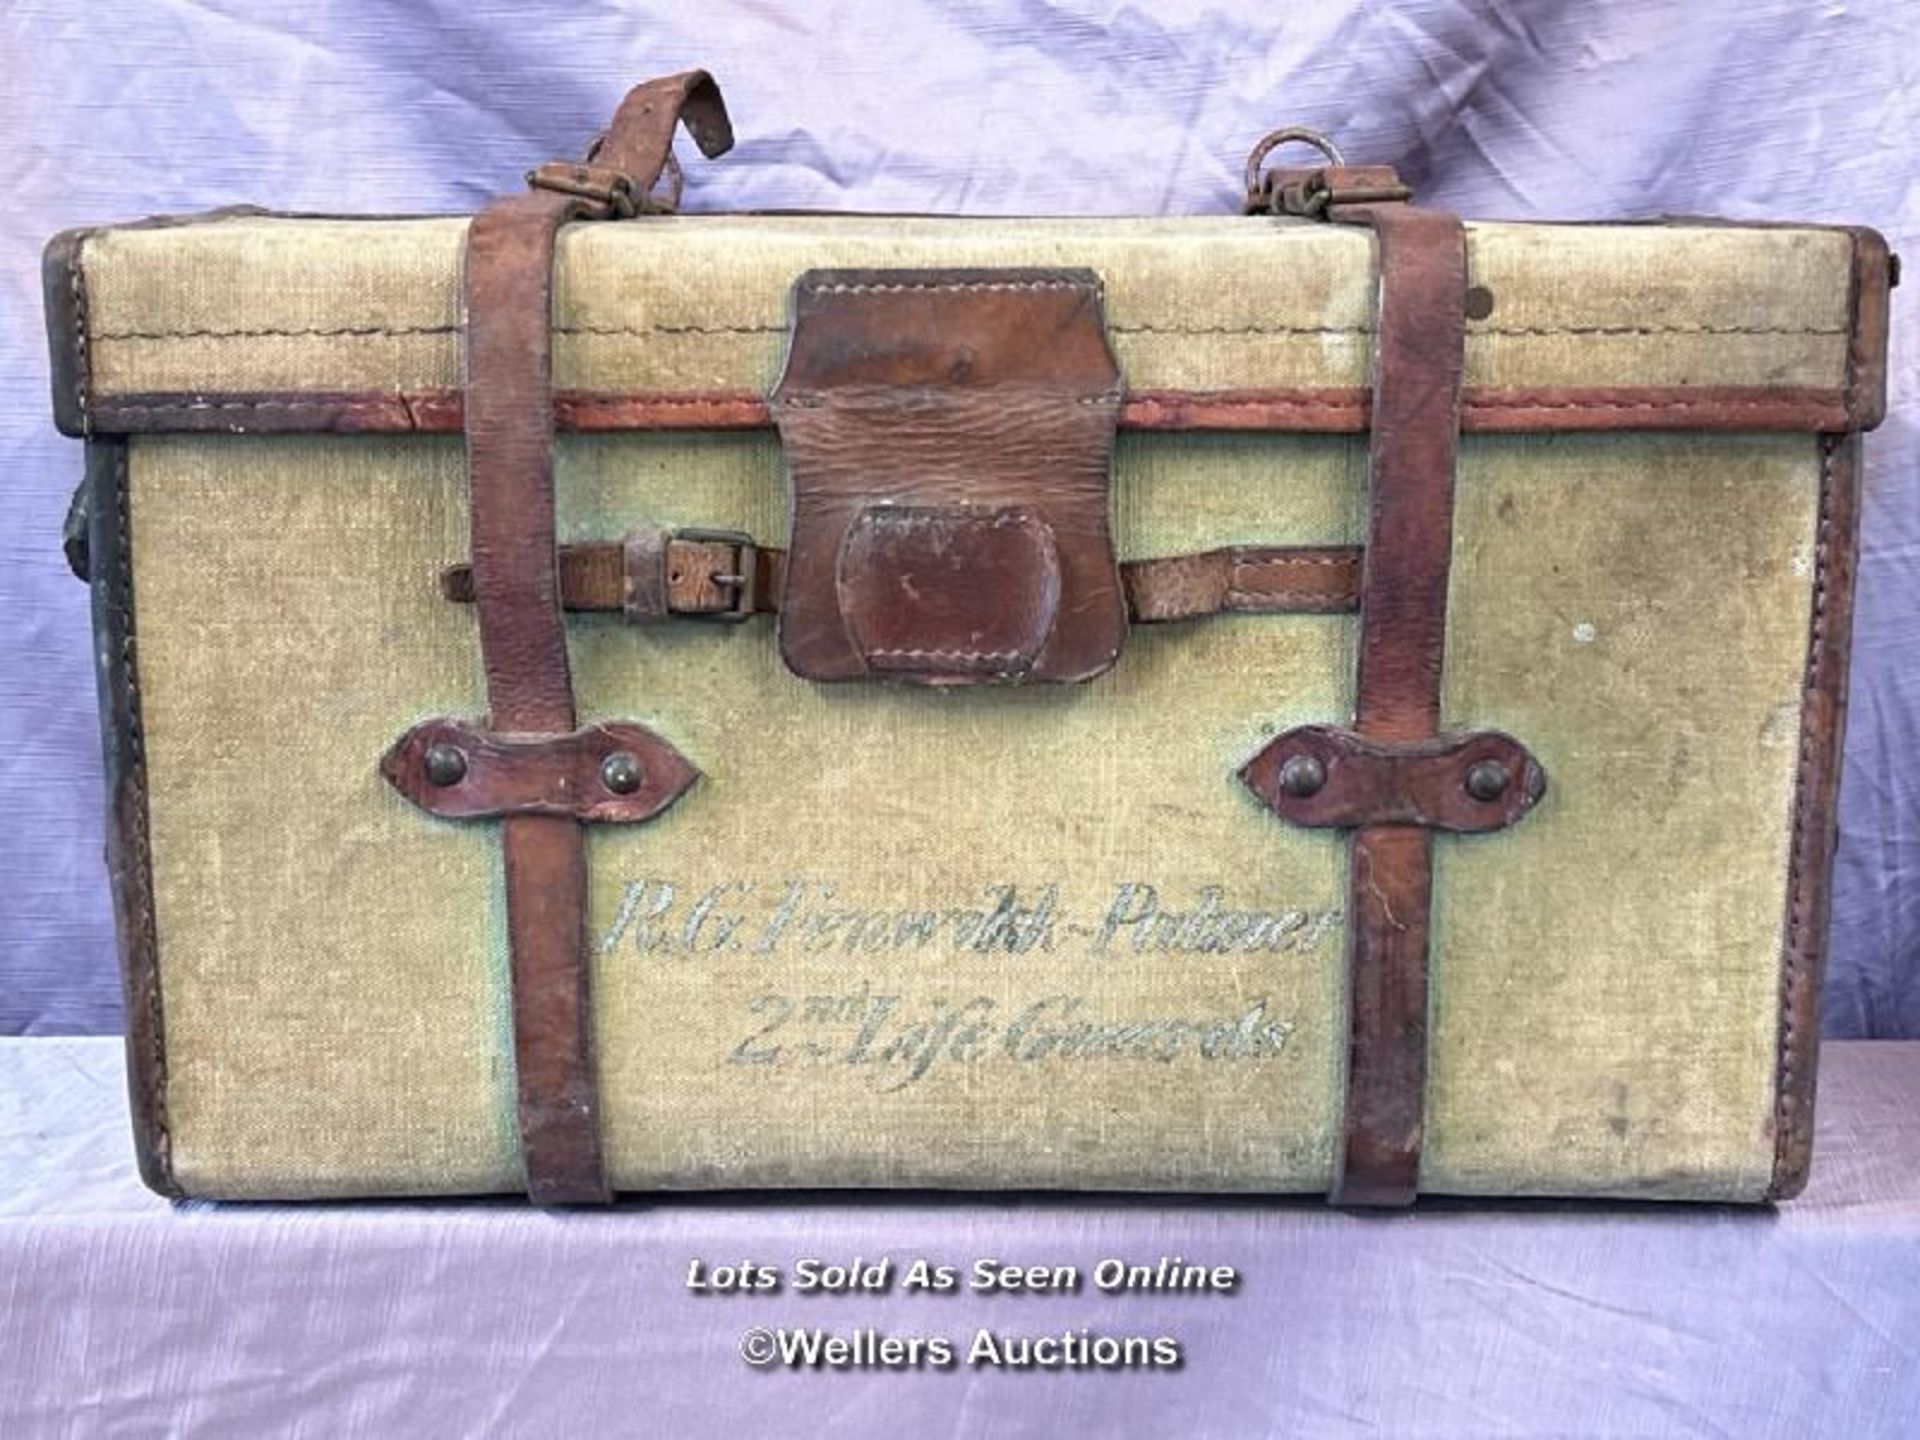 VINTAGE CANVAS MILITARY TRUNK WITH LEATHER MOUNTS AND STRAPS, PREVIOUSLY OWNED BY R G FENWICK-